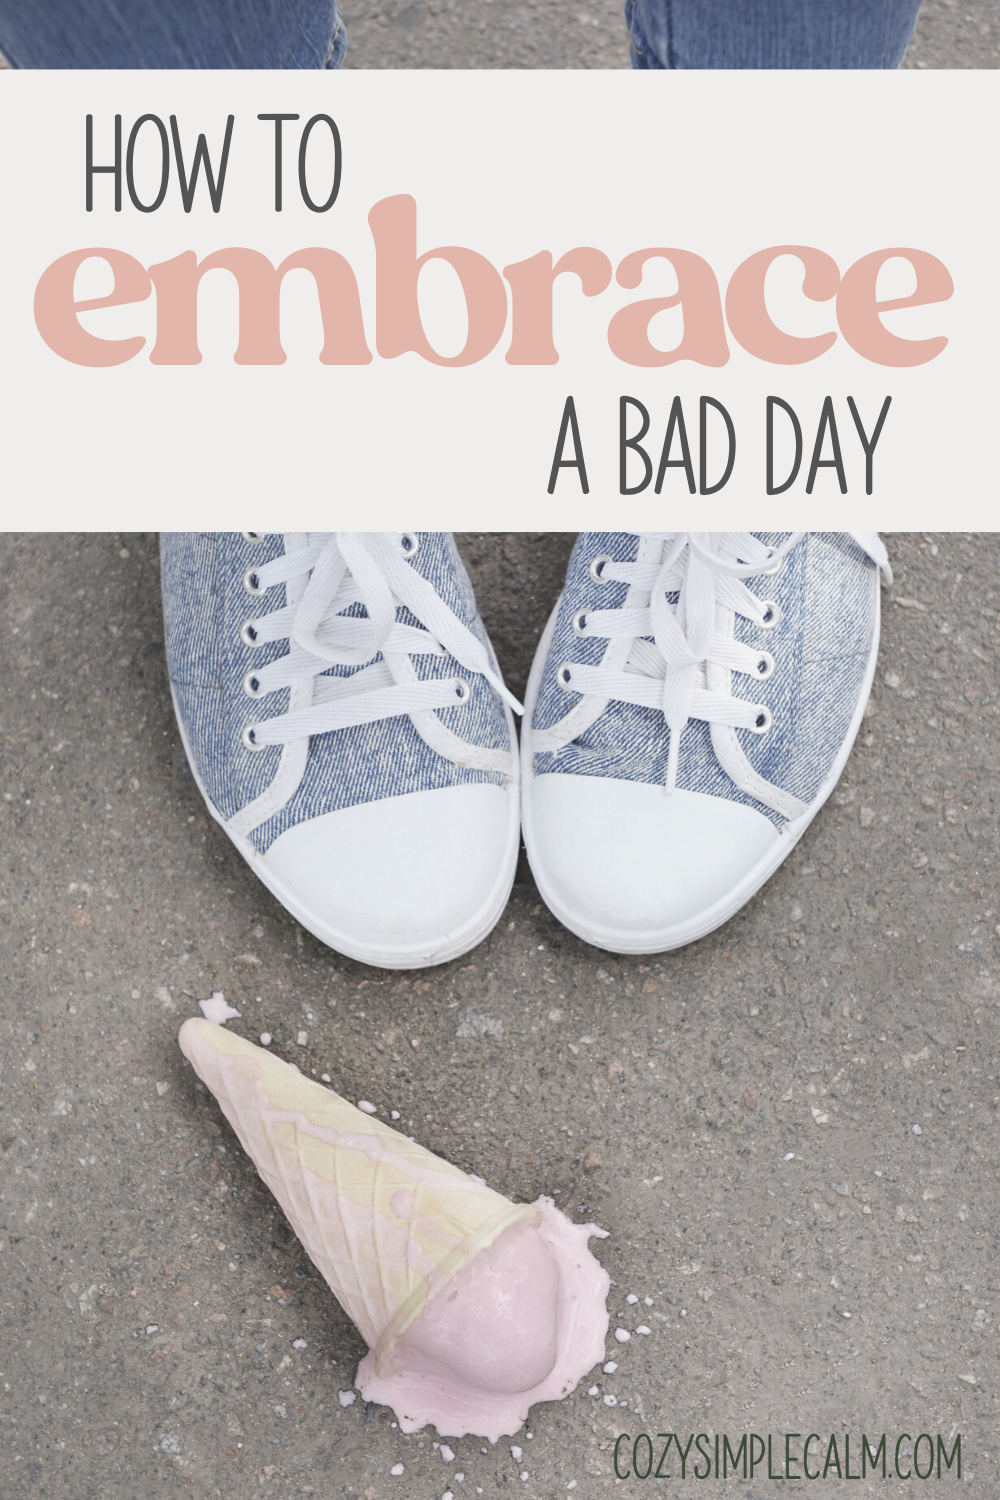 Image of shoes with dropped ice cream cone on ground - Text overlay: How to embrace a bad day - cozysimeplcalm.com